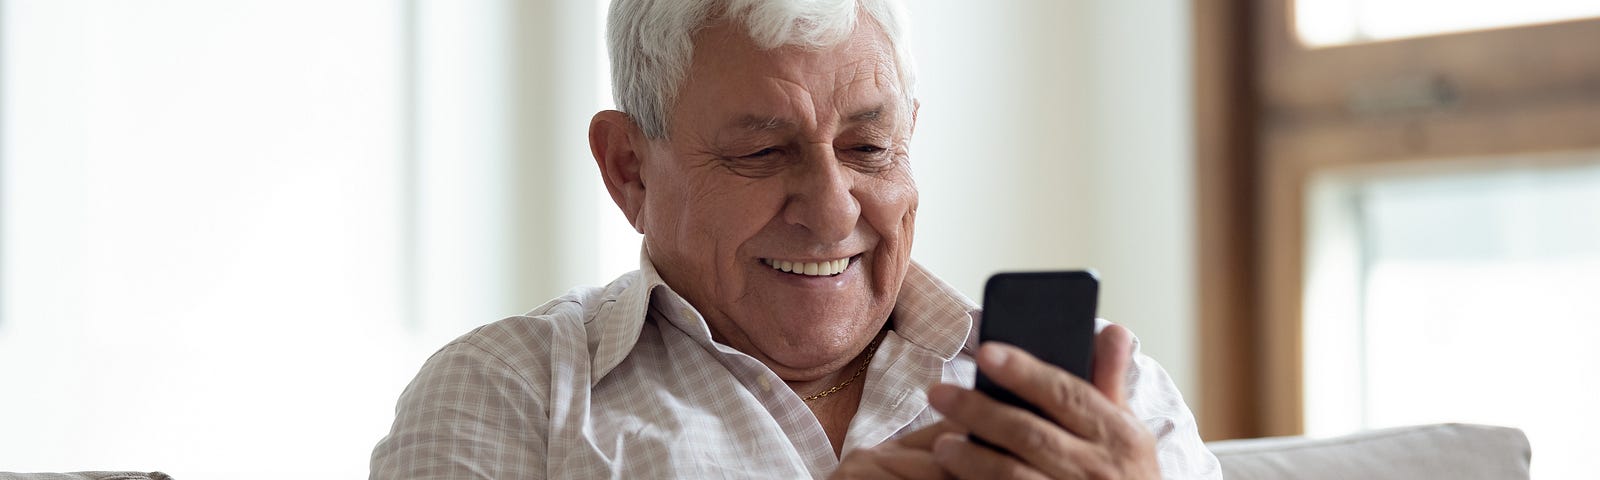 Older man smiles while reading off a cell phone screen.